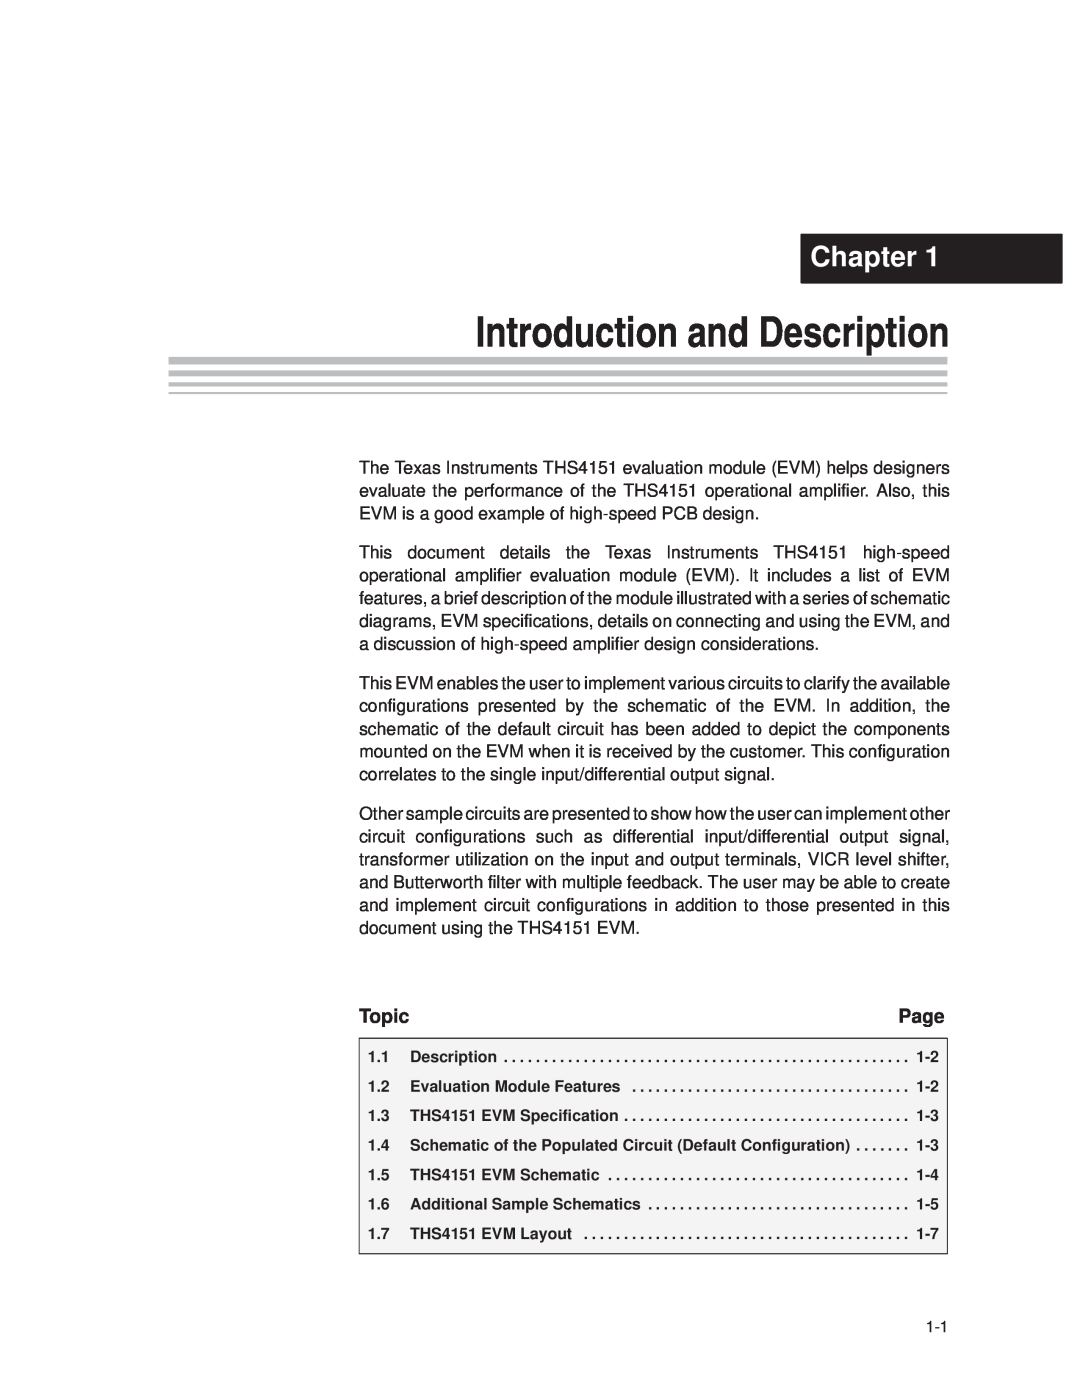 Texas Instruments THS4151 manual Introduction and Description, Chapter, Page, Topic 